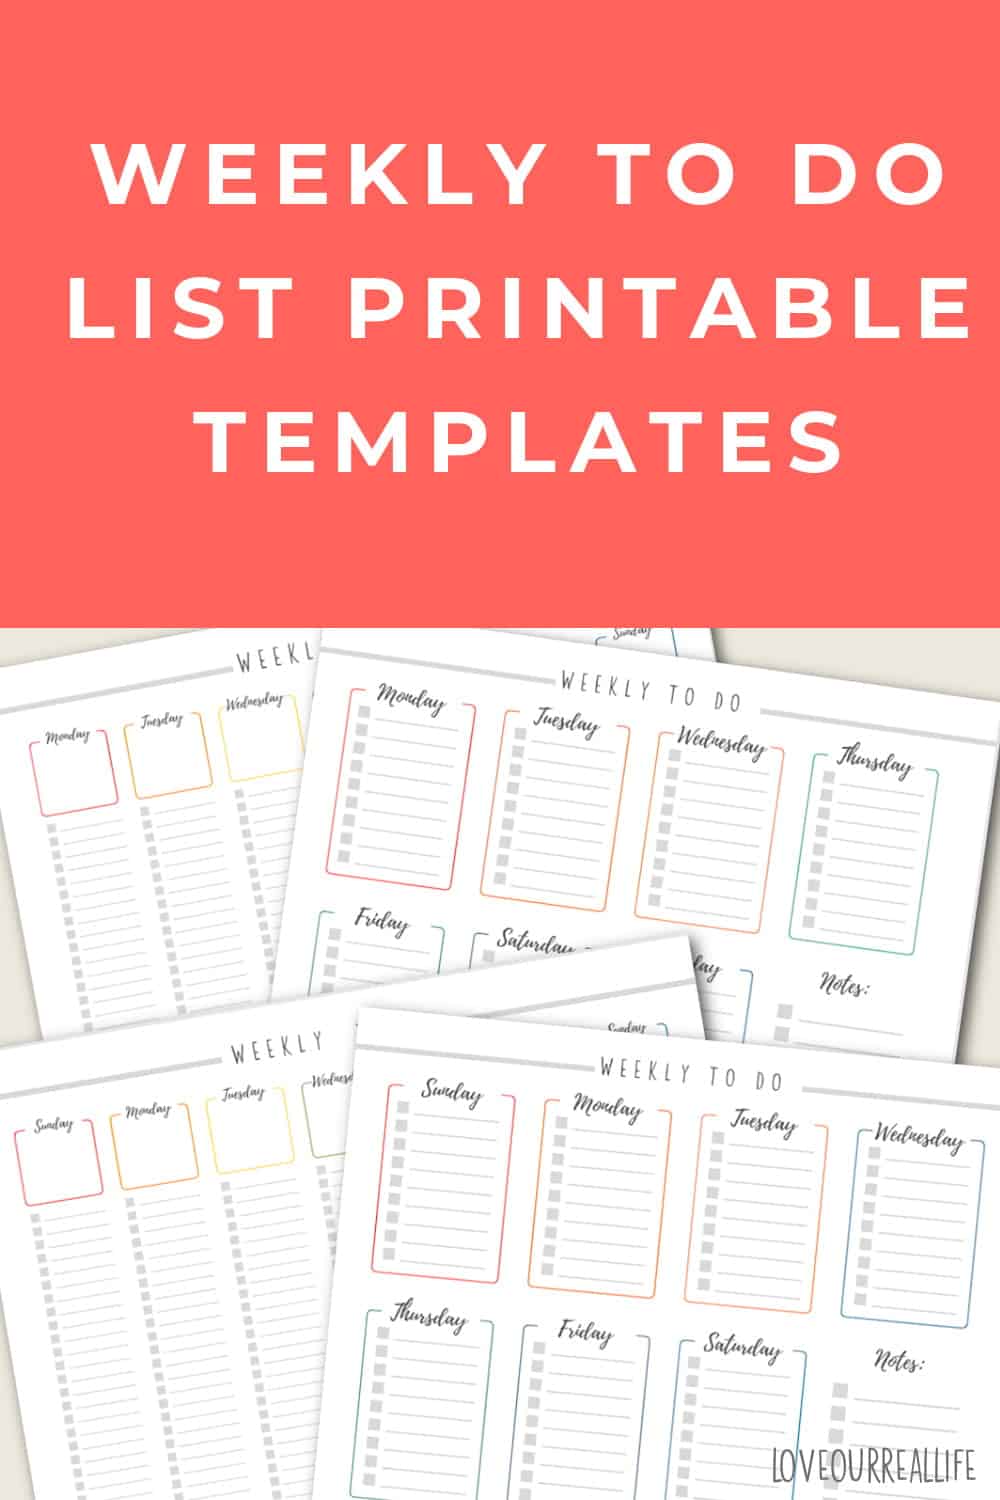 Pinterest pin for weekly to do list printable templates.